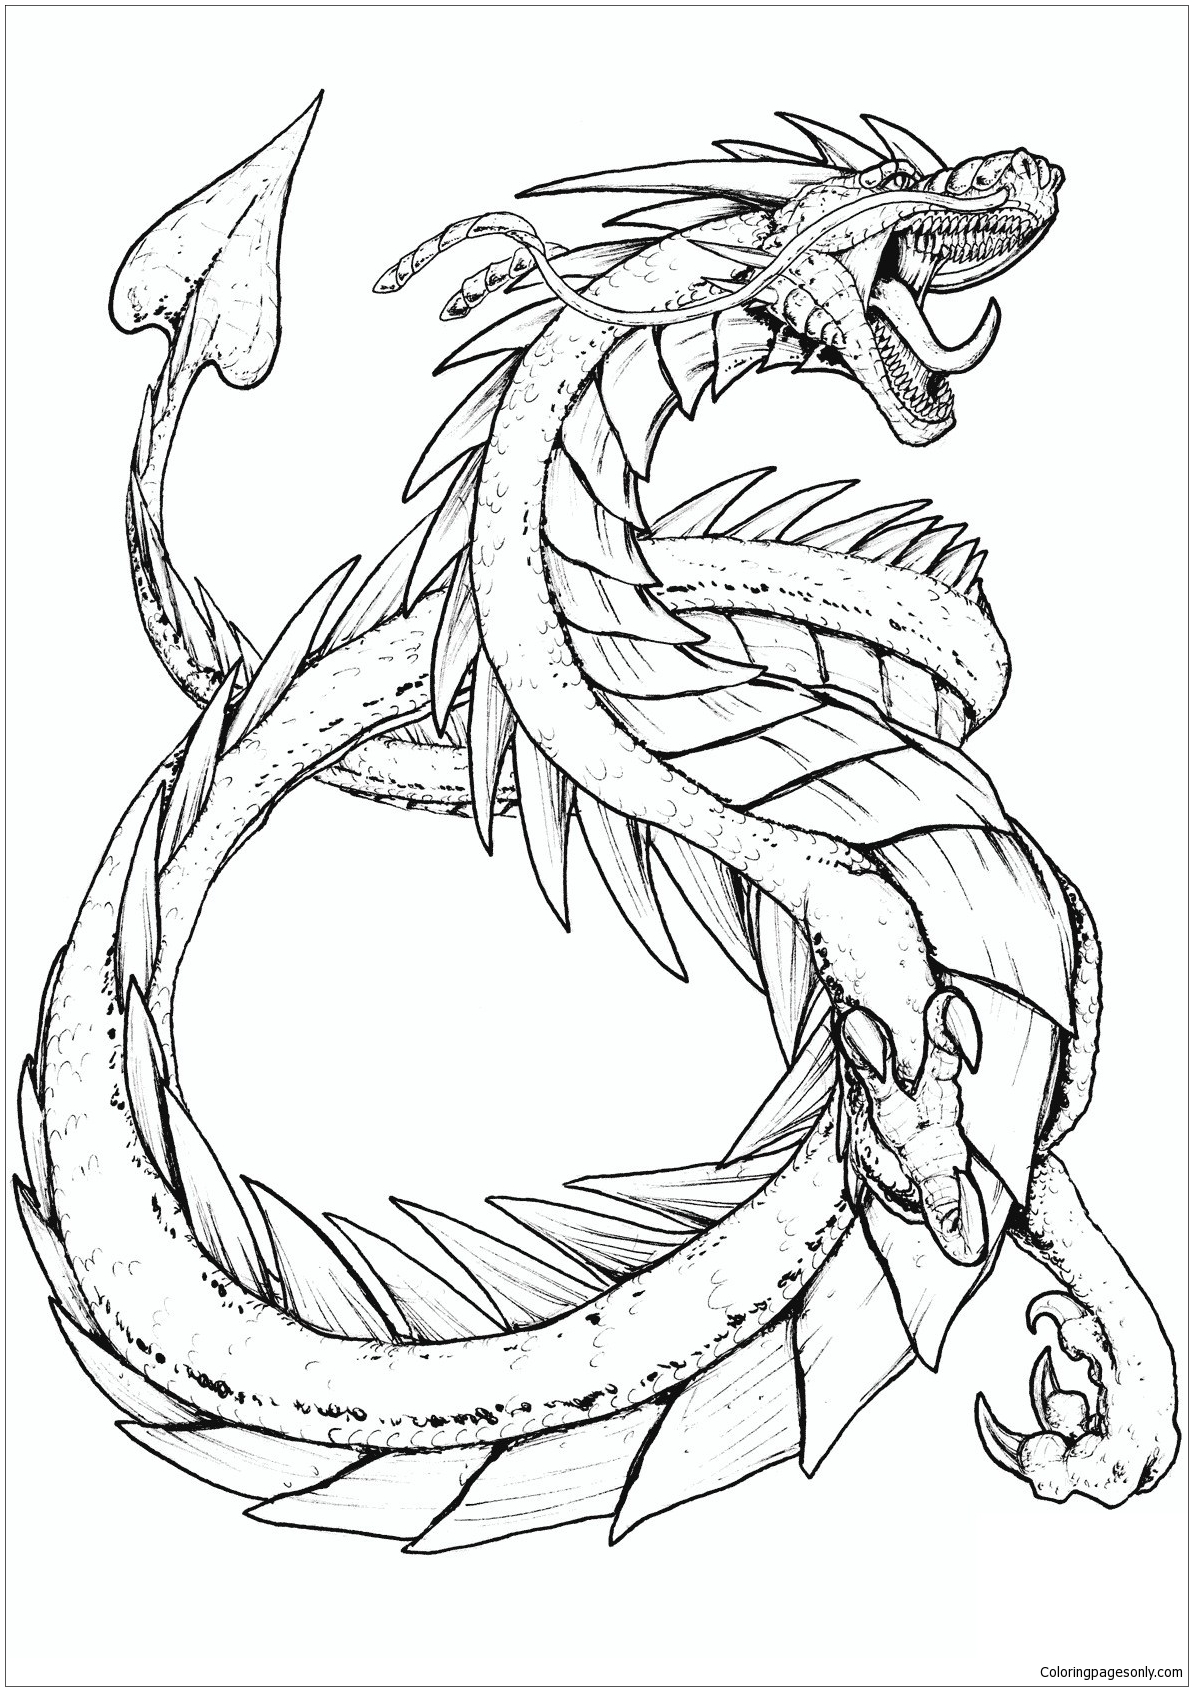 Best Dragons Coloring Pages - Dragon Coloring Pages - Coloring Pages For  Kids And Adults